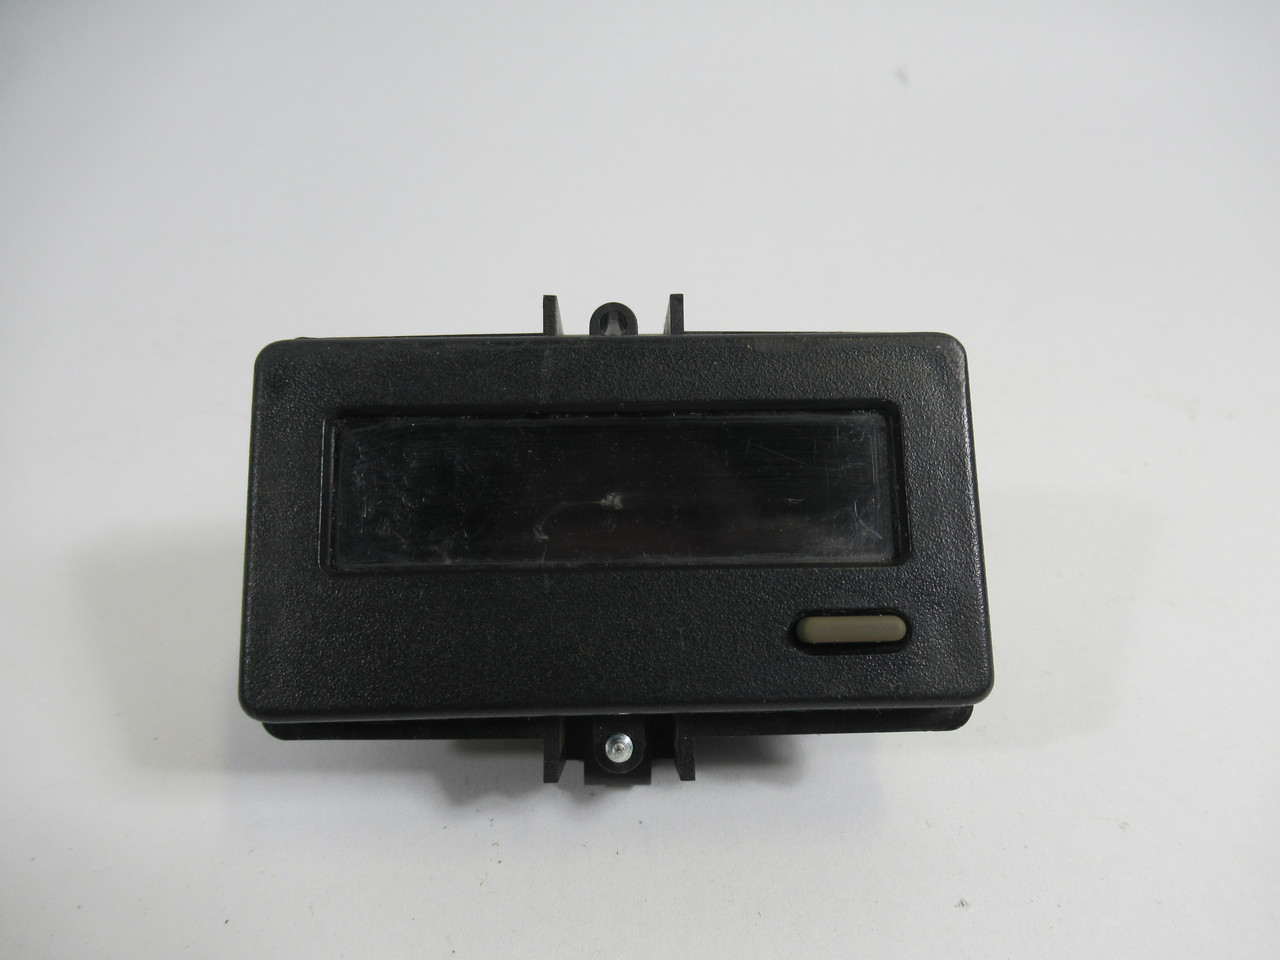 Red Lion CUB4L020 Back Lit 6-Digit Counter 28VDC 68mm COSMETIC DAMAGE USED